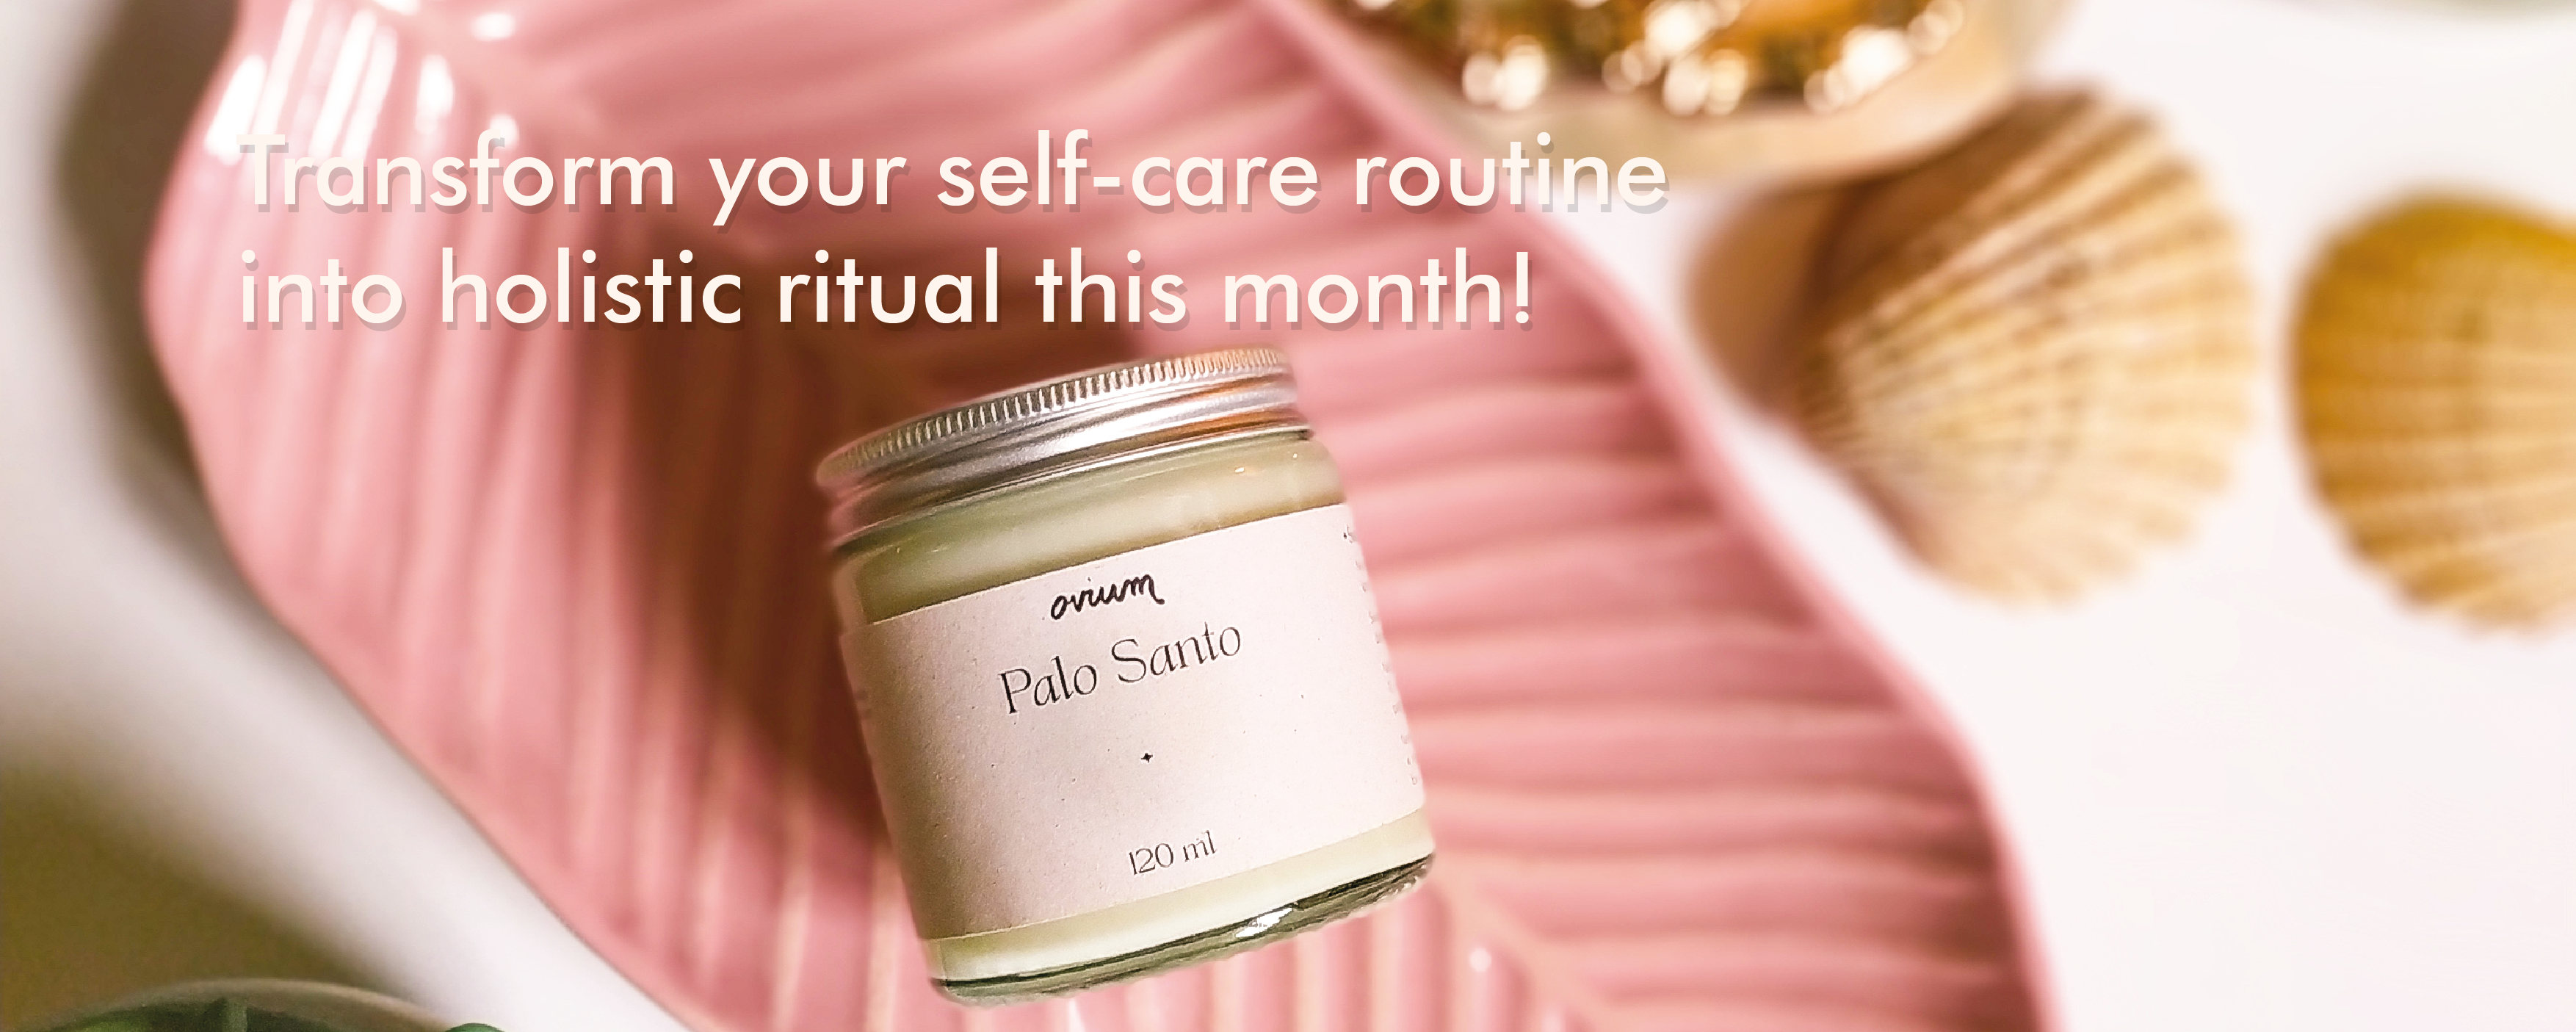 Transform your selfcare routine into holistic ritual this month